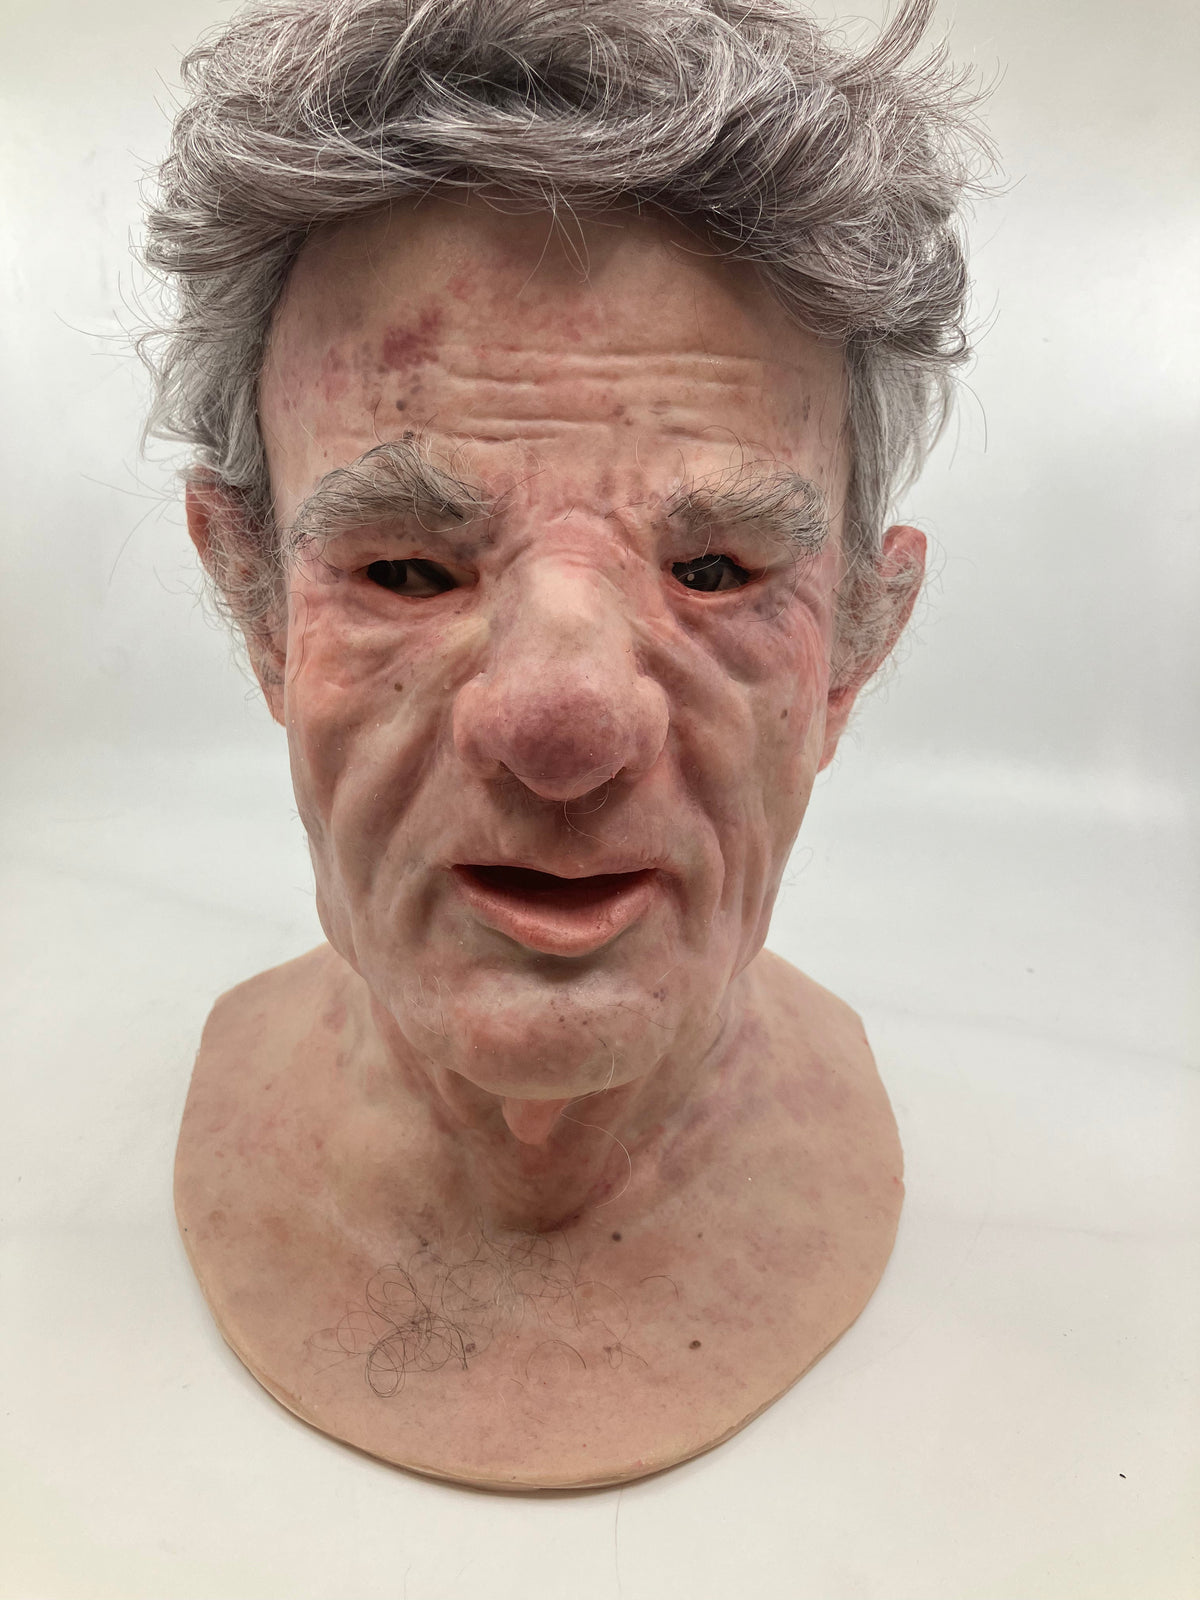 MM324 Andrew Wise - SimMan Facial Overlay